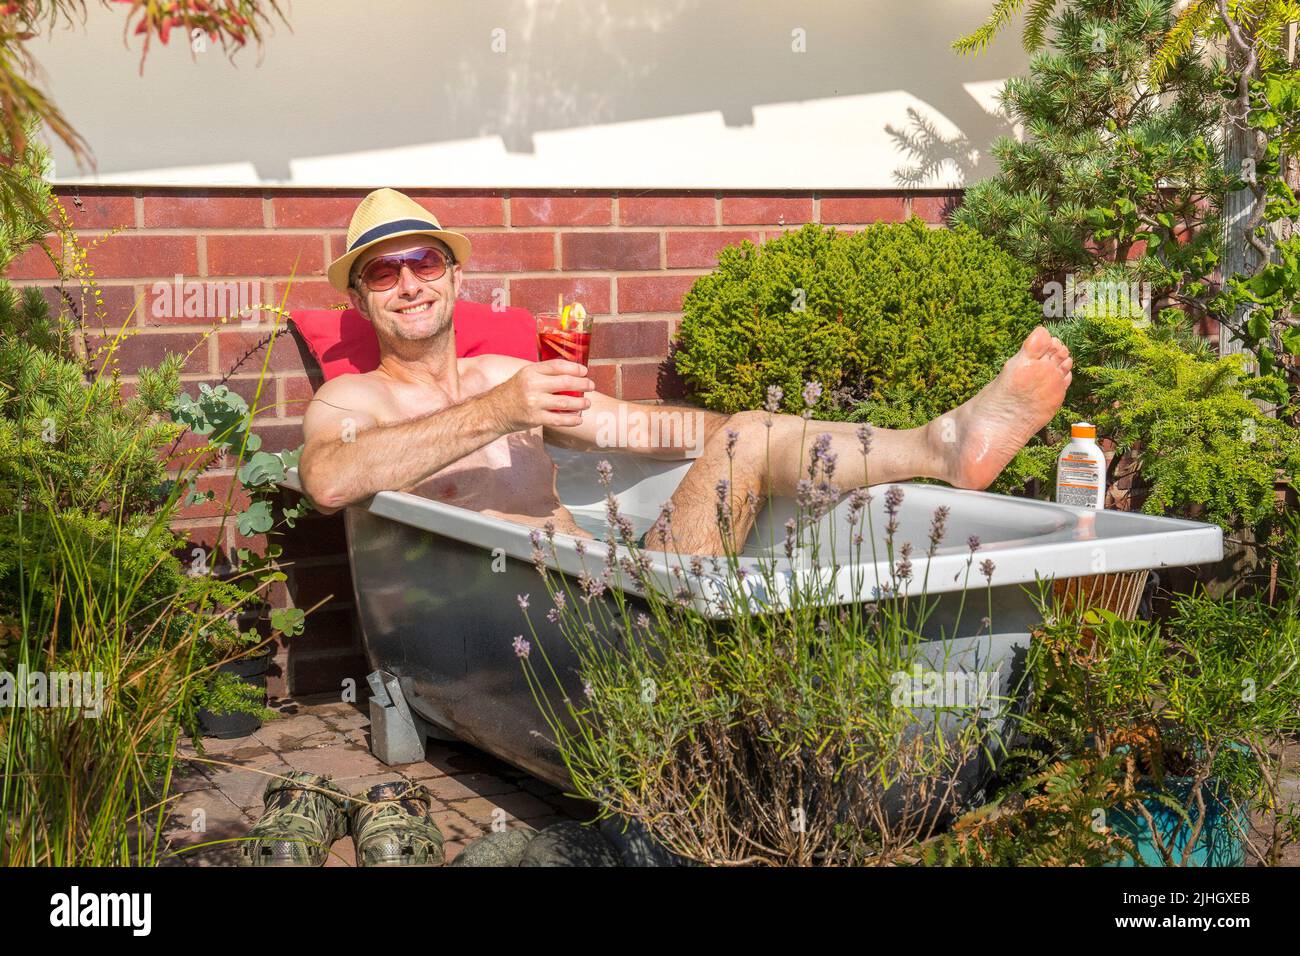 Kidderminster, UK. 18th July, 2022. UK weather: with soaring temperatures there is only one way to cool down - Lee Hudson decides to take the day off and jump into his homemade plunge pool! Today's scorching heat gives perfect opportunity to reuse an old bath tub as a plunge pool for the day before recycling the old tub. Cold water in the tub reached 28 degrees by mid-afternoon making it ideal for a soothing dip and a fruity drink to rehydrate. Credit: Lee Hudson/Alamy Live News Stock Photo